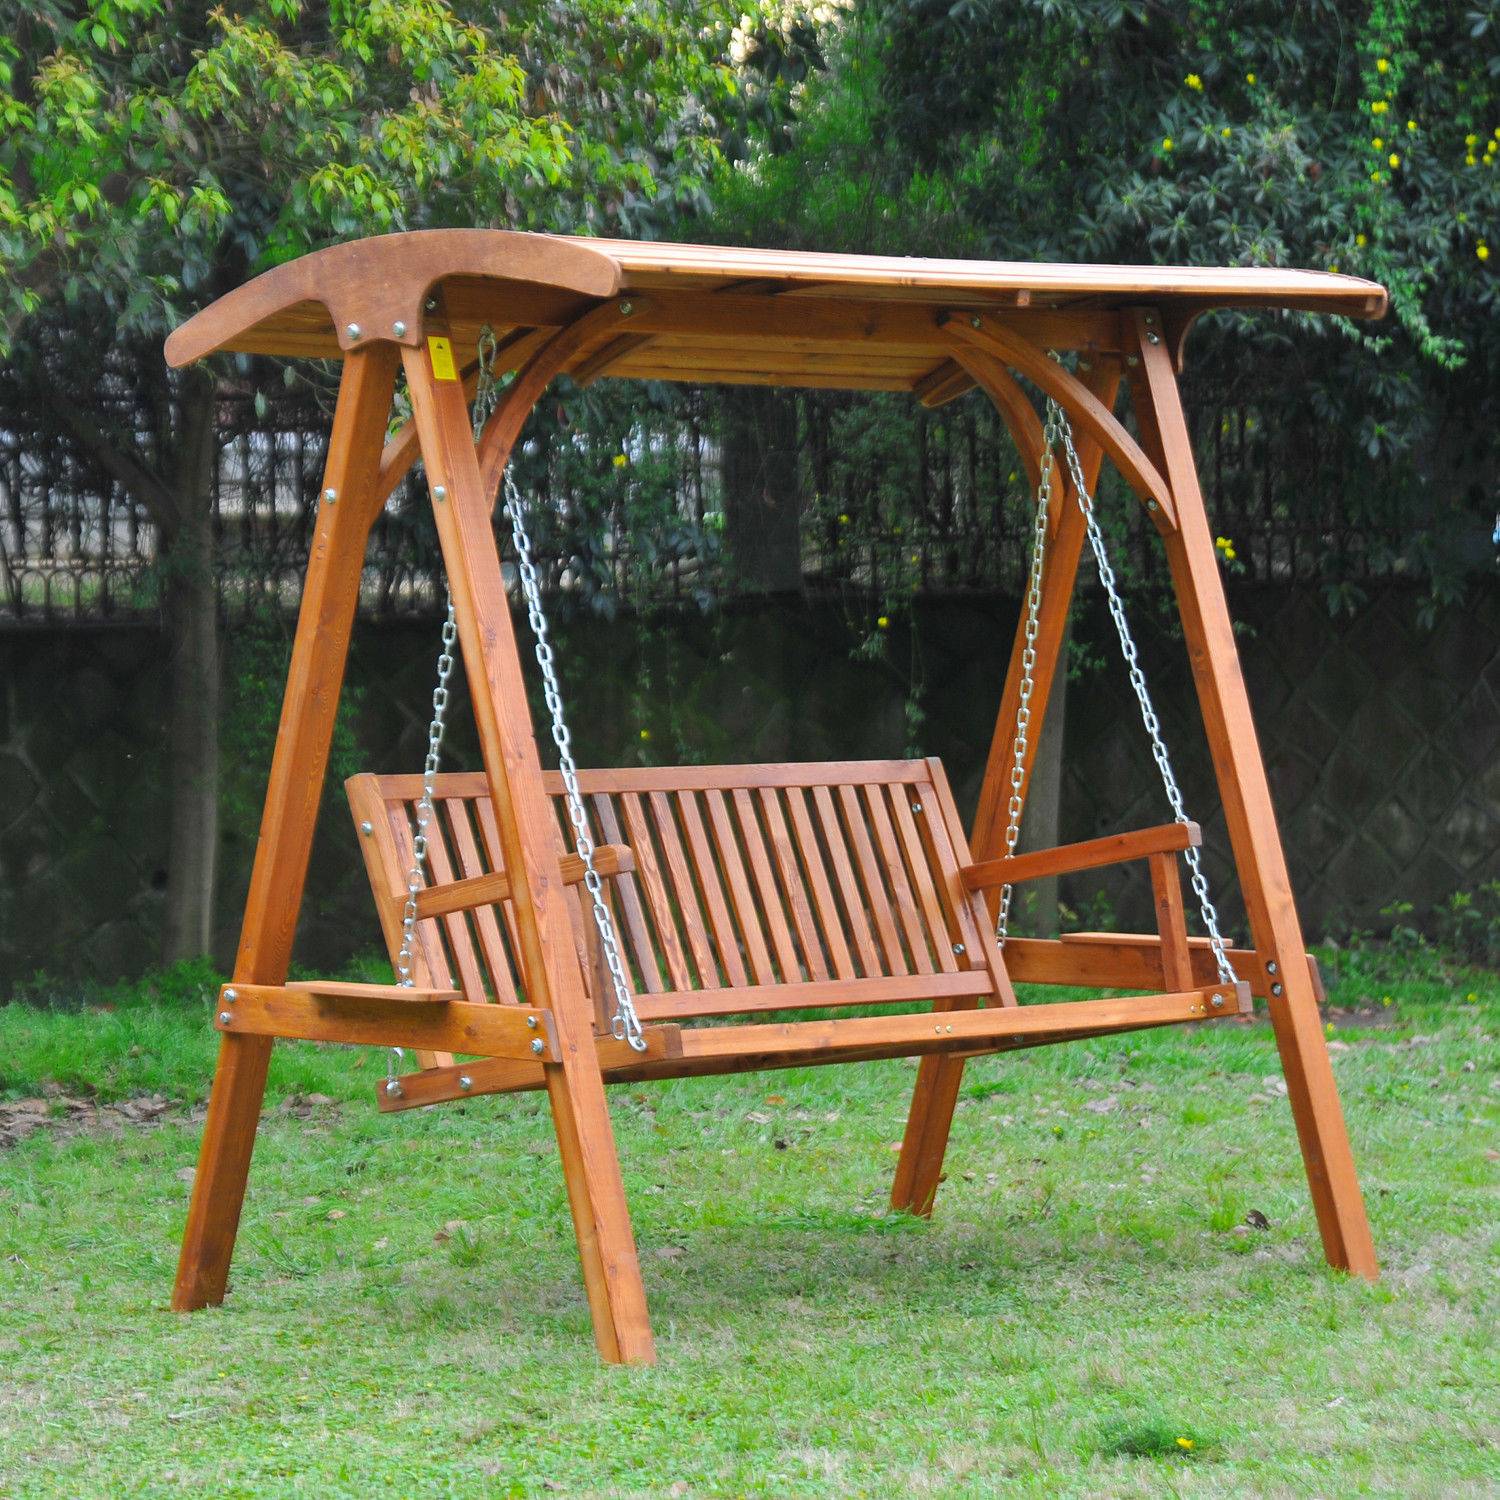 Awesome Diy Wooden Pallet Swing Chair Ideas Swing Chair Garden